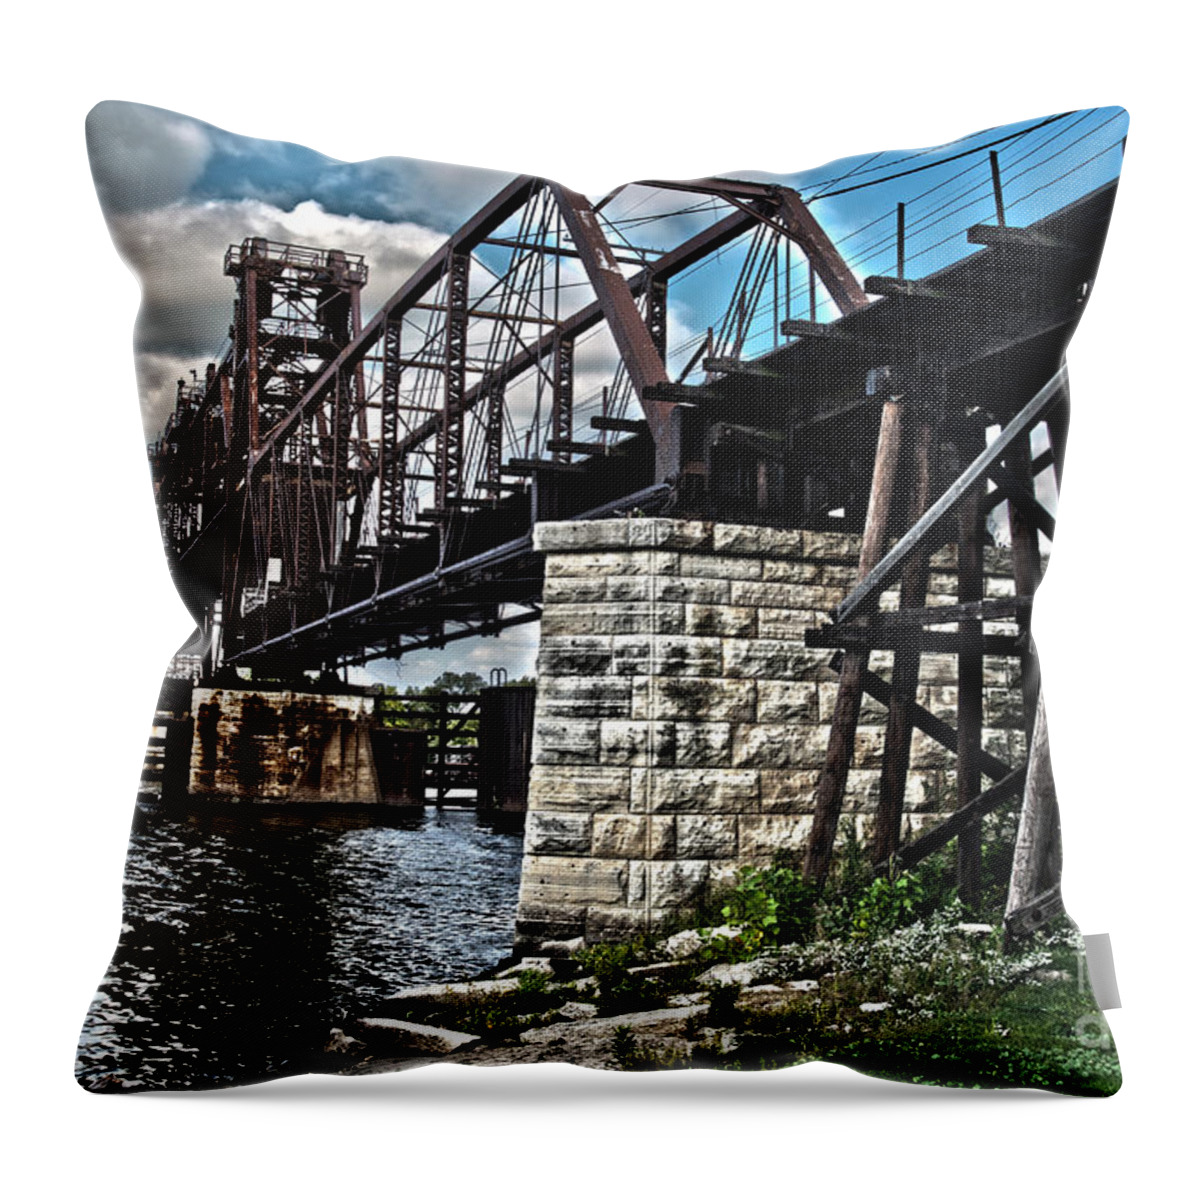 Beautiful Throw Pillow featuring the photograph Steel Water hdr number 7 by Alan Look